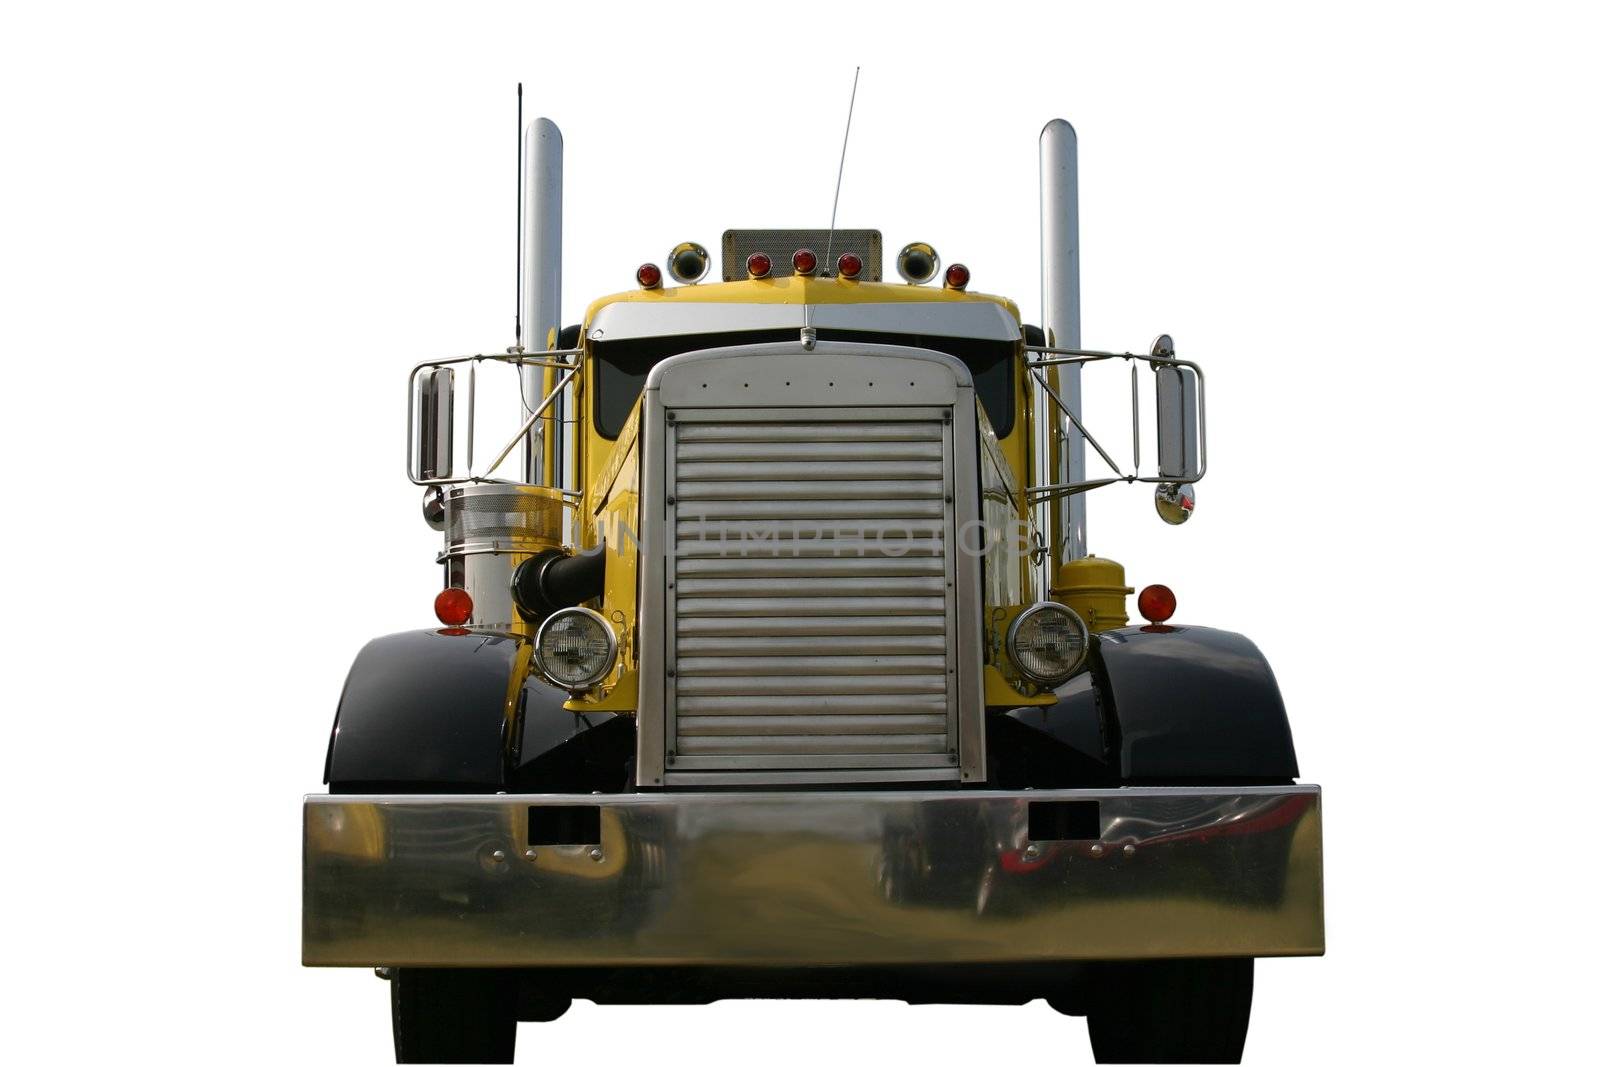 This is a picture of the front of a large black and yellow 1950s, 18 wheeler semi truck isolated on a white background.